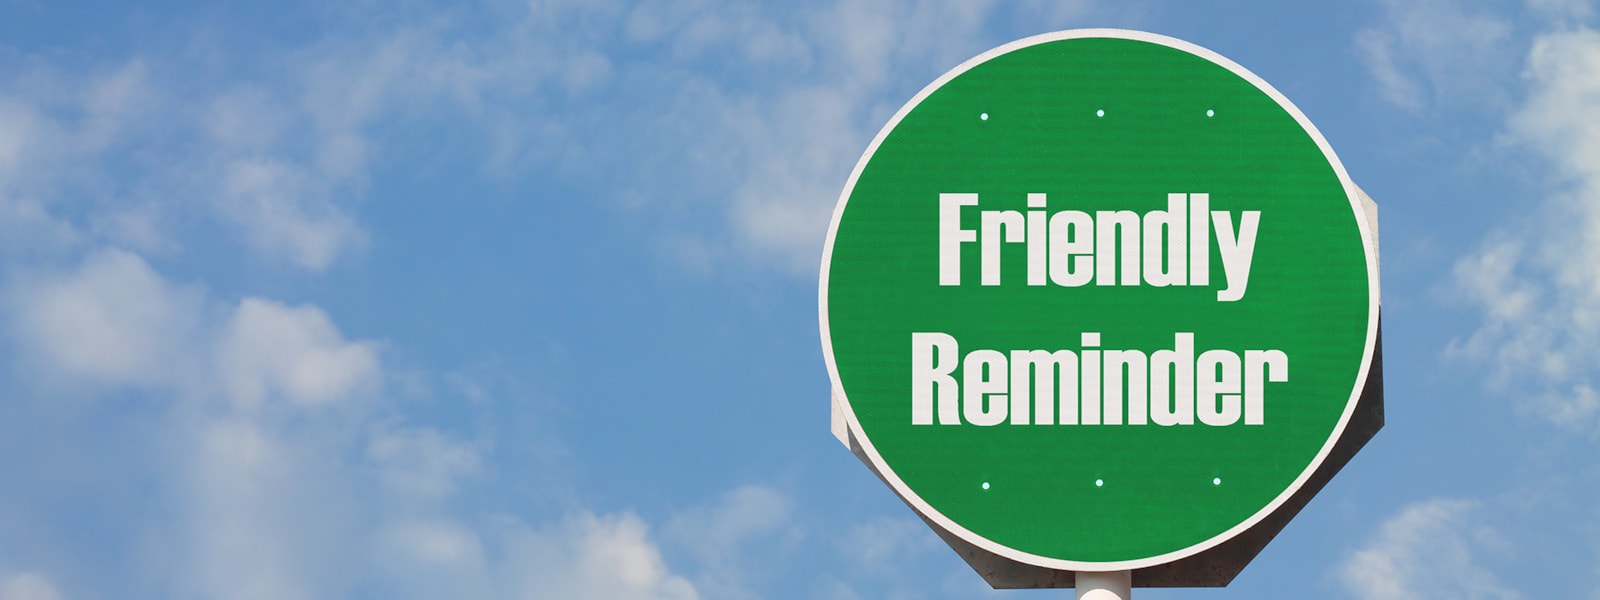 Green sign with words "Friendly Reminder" against sky background